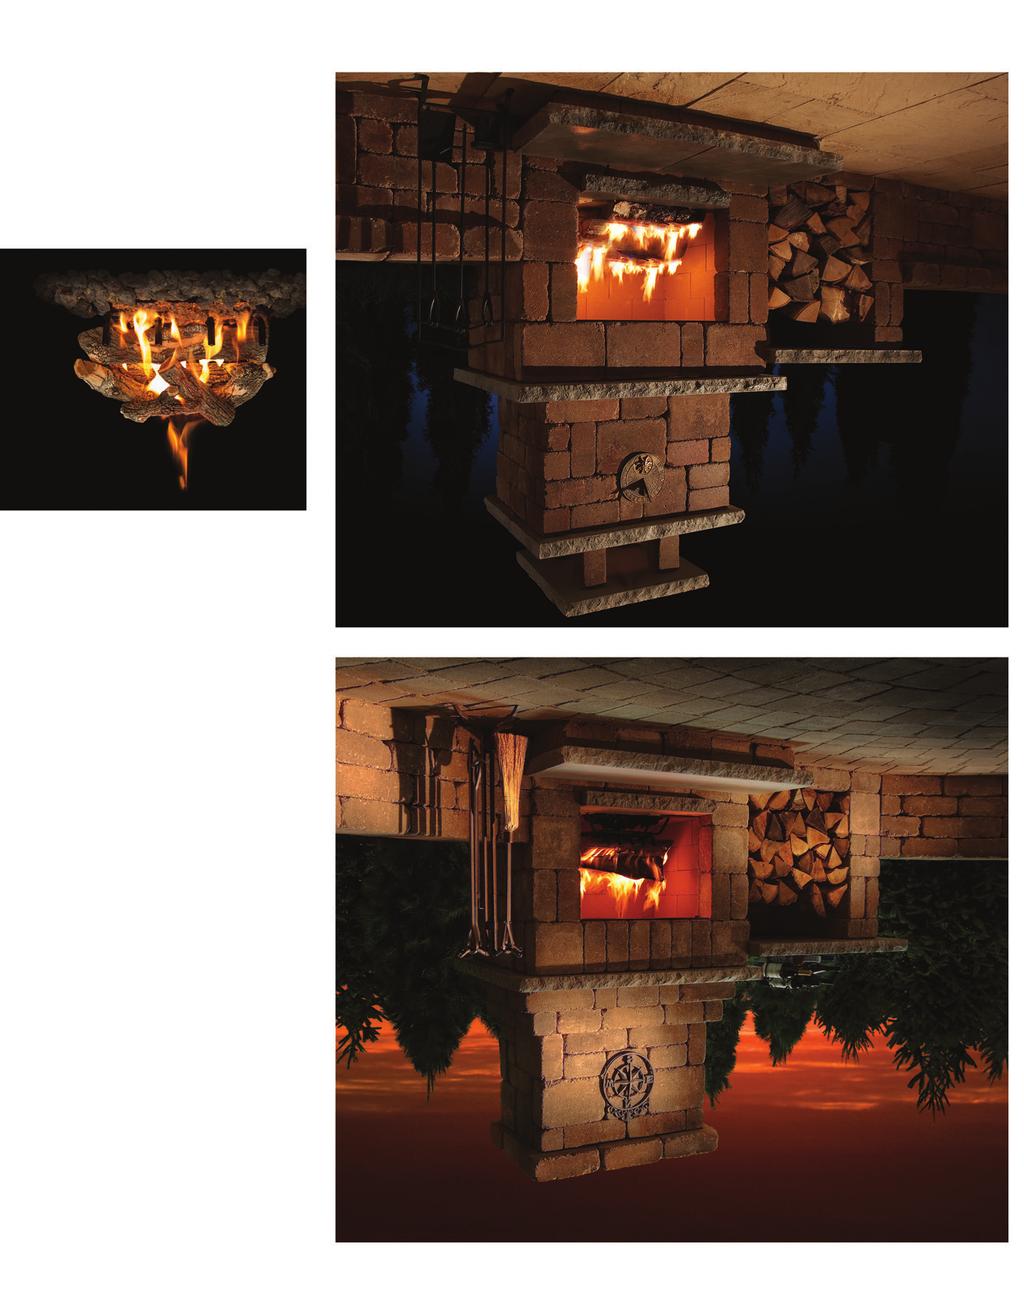 The Compact and Colonial Fireplace Kits are ideal for smaller backyards and patios. Each kit comes complete with 2.